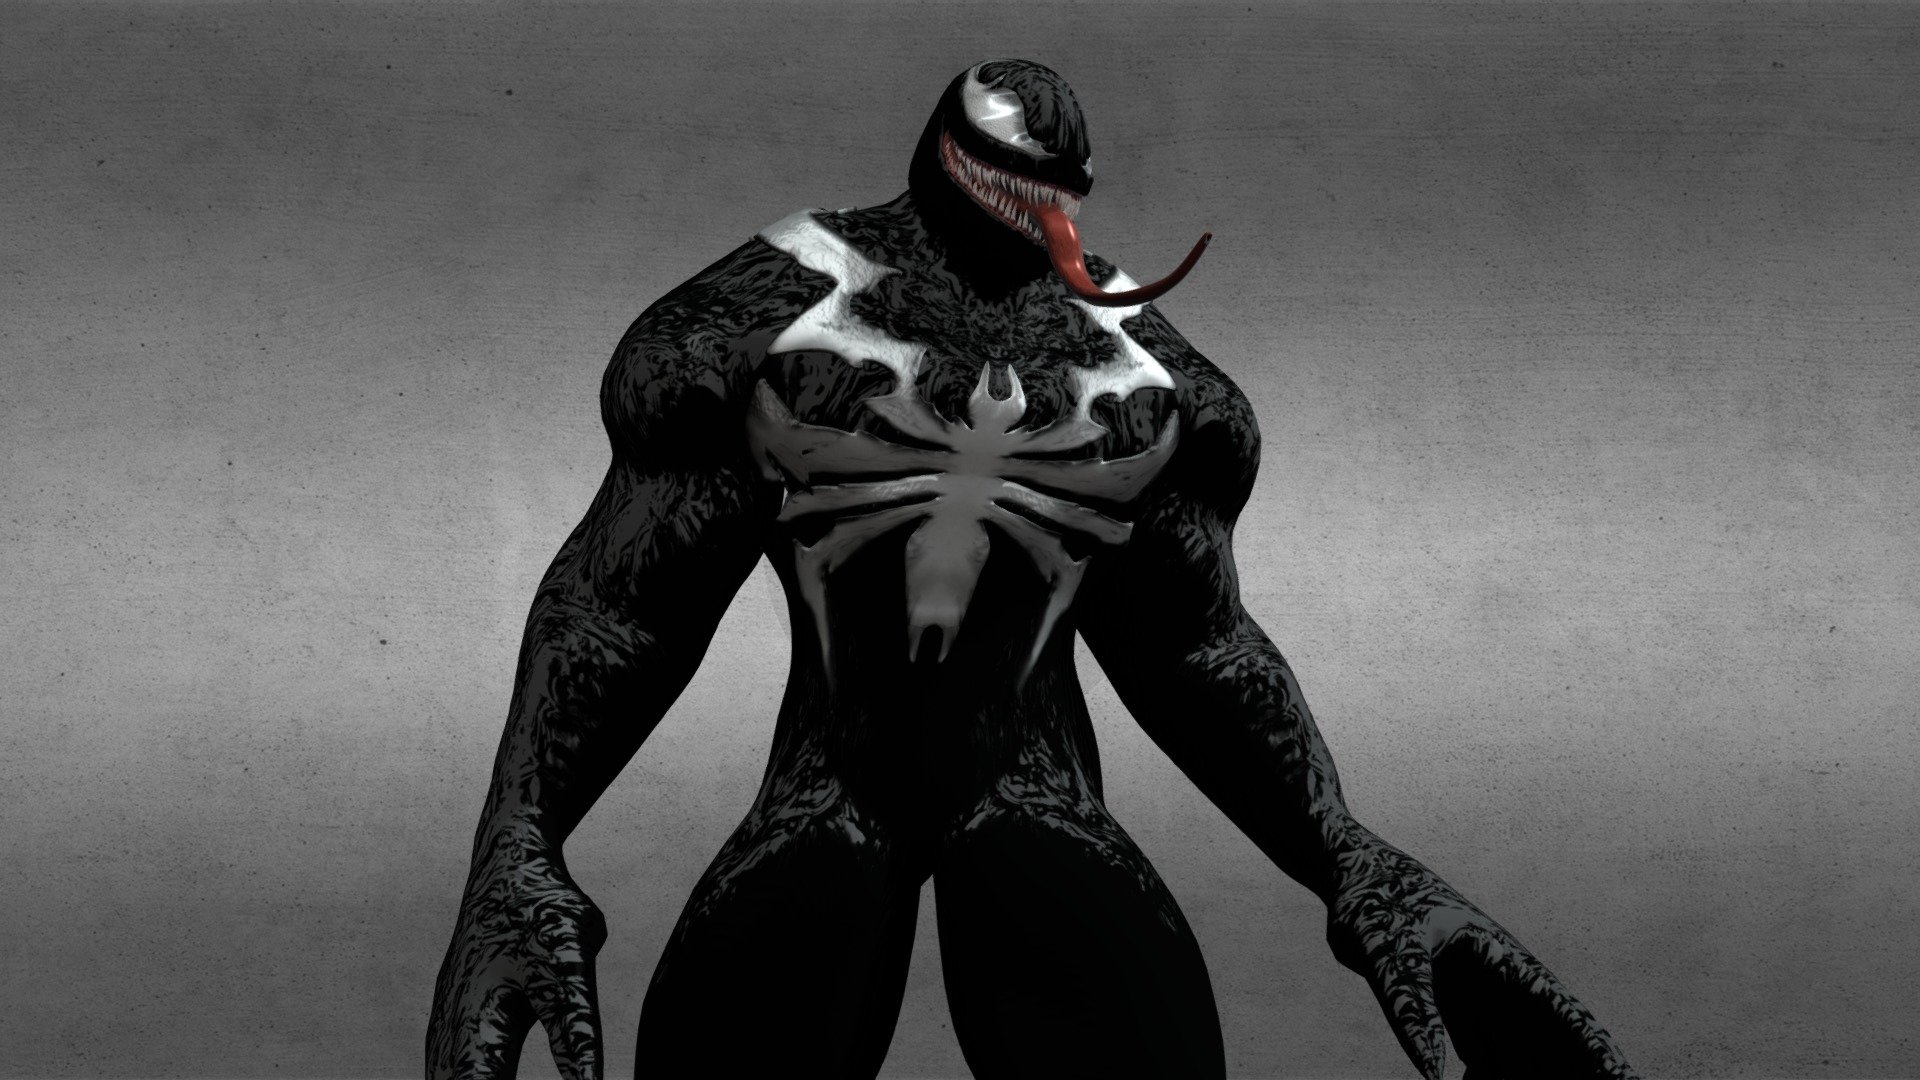 Inspired by Insomniac Games’ Spider-Man 2.

Animations include:




Jumping

Idle

Walk

Attack

Roar

All from Mixamo: https://www.mixamo.com/#/

Available in all download formats. Enjoy! - Venom - Spider-Man 2 (PS5) - Download Free 3D model by jerrylxia 3d model